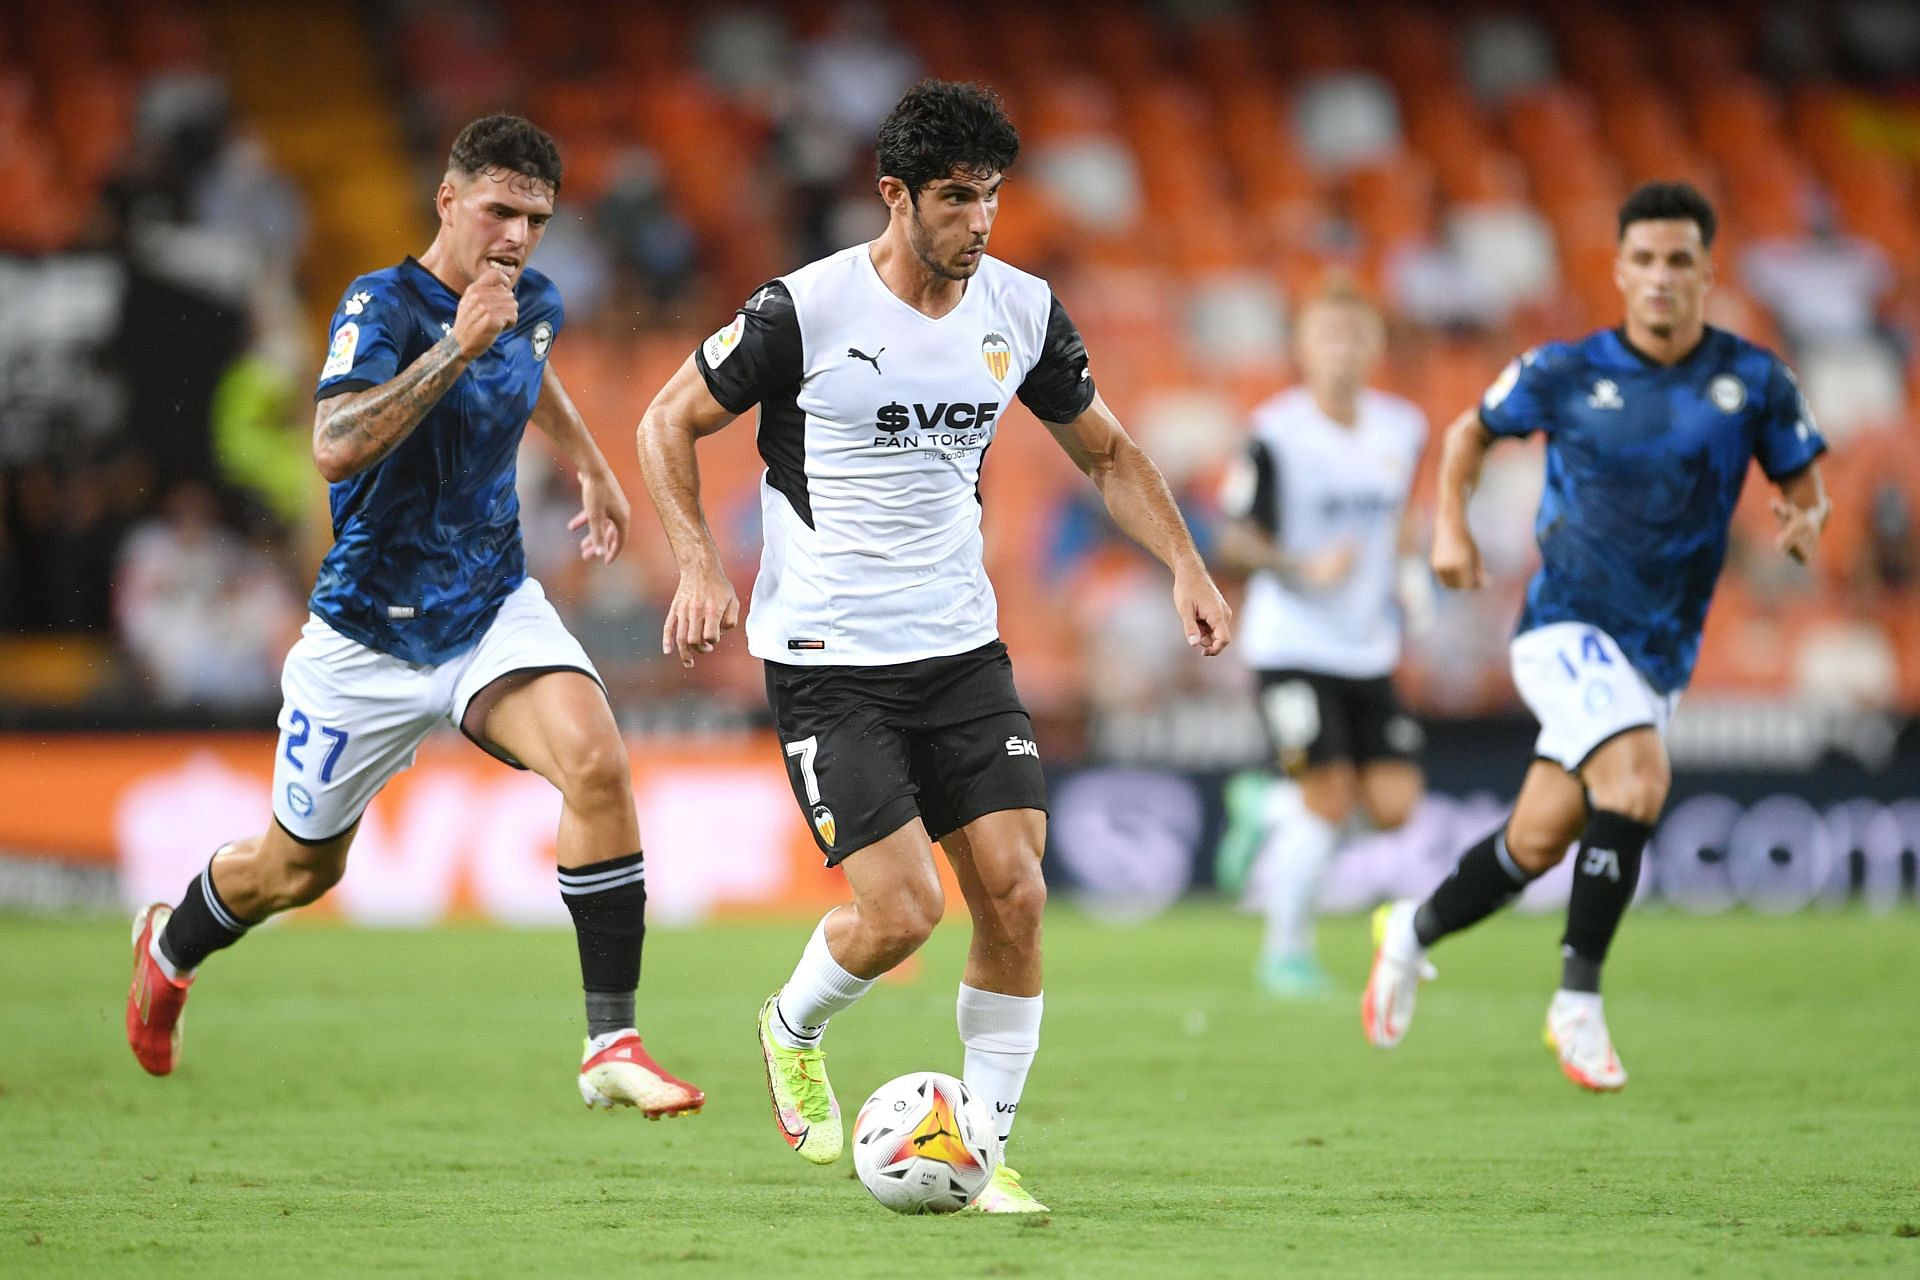 Valencia take on Deportivo Alaves this weekend